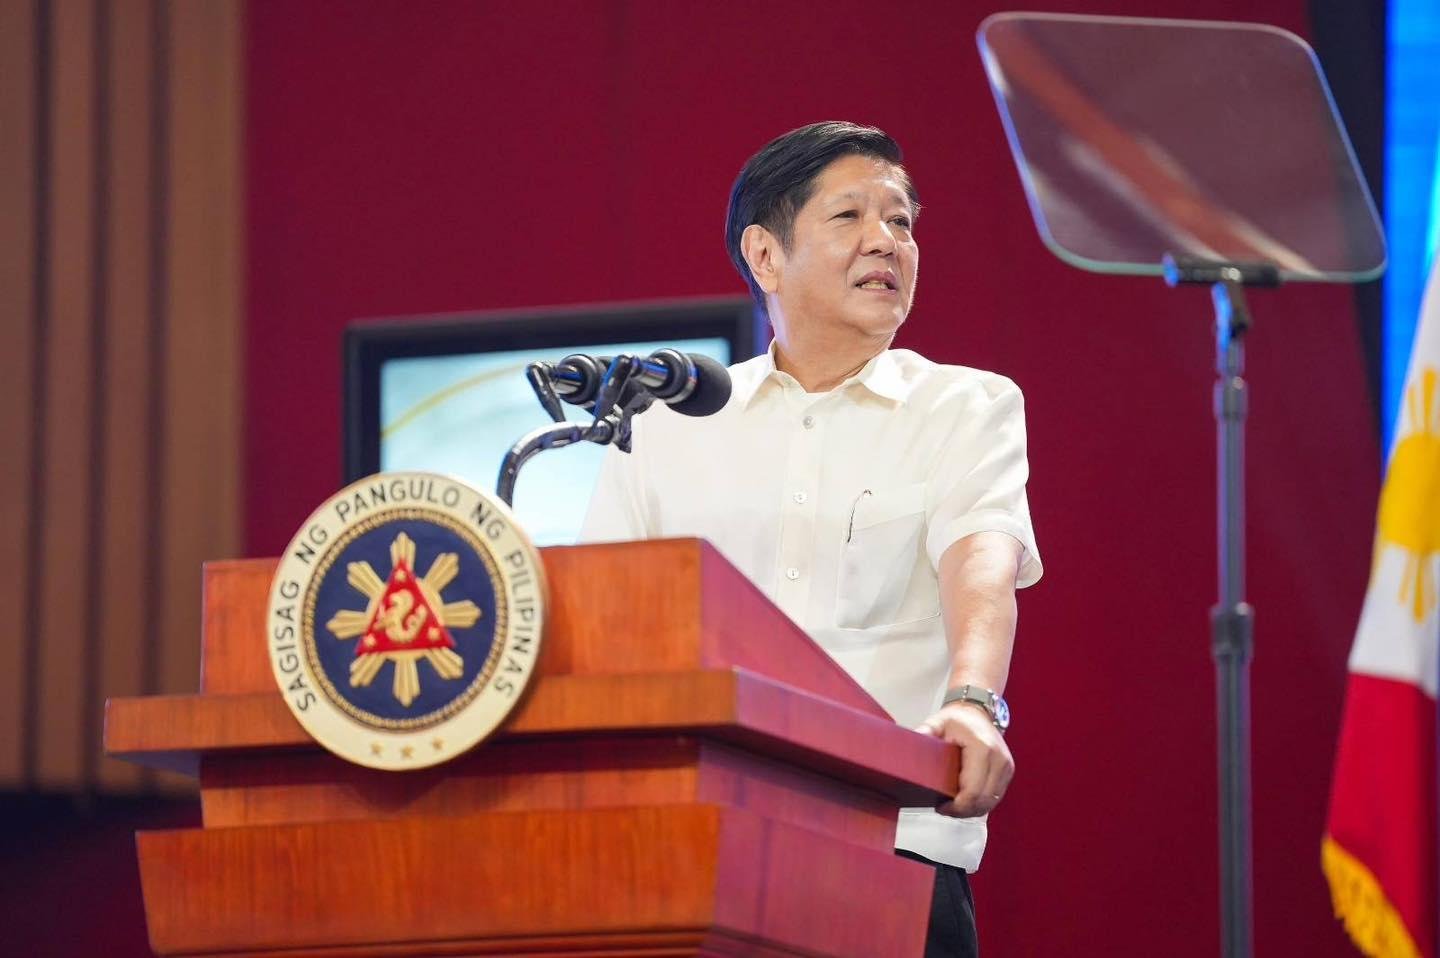 Marcos to Muslim community: Be examples of humility, peace, strength